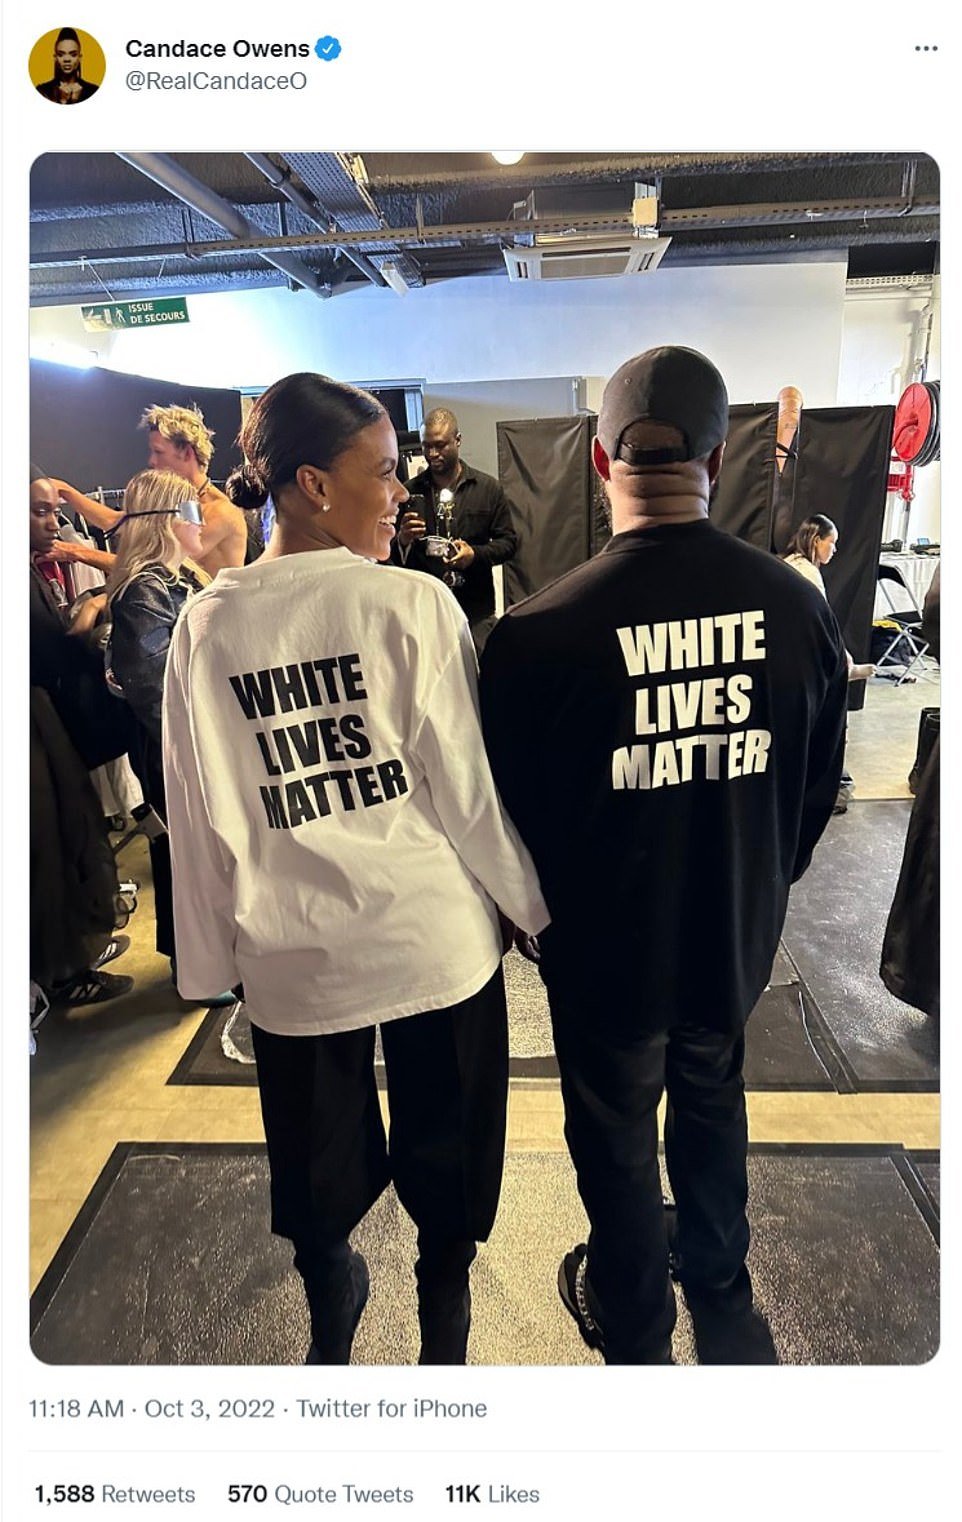 Palling around: Also posing with West was the right-wing commentator Candace Owens, who beamed while wearing a complementary version of the 